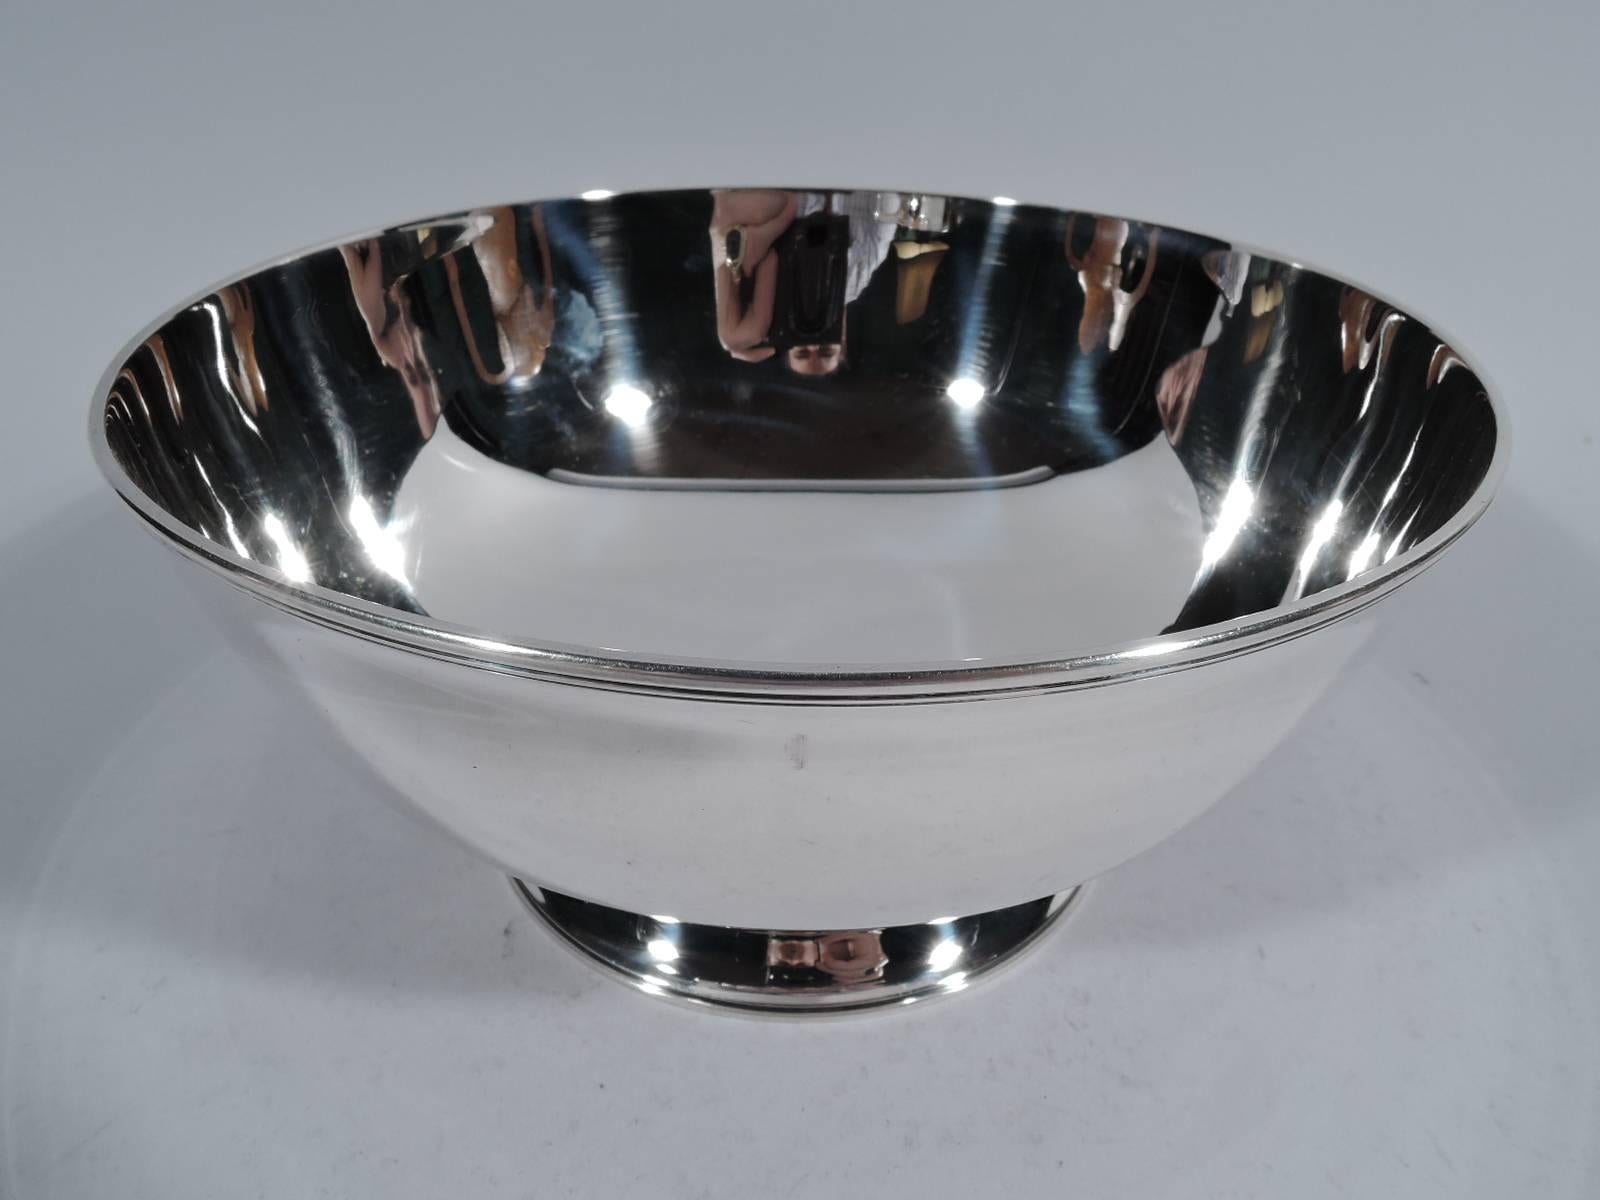 Federal style sterling silver bowl. Made by Tiffany & Co. in New York. Bowl has curved sides, reeded rim, and stepped foot. Spare classicism after a historic prototype. Hallmark includes pattern no. 19168L, director's letter L (1956-ca 1965), and